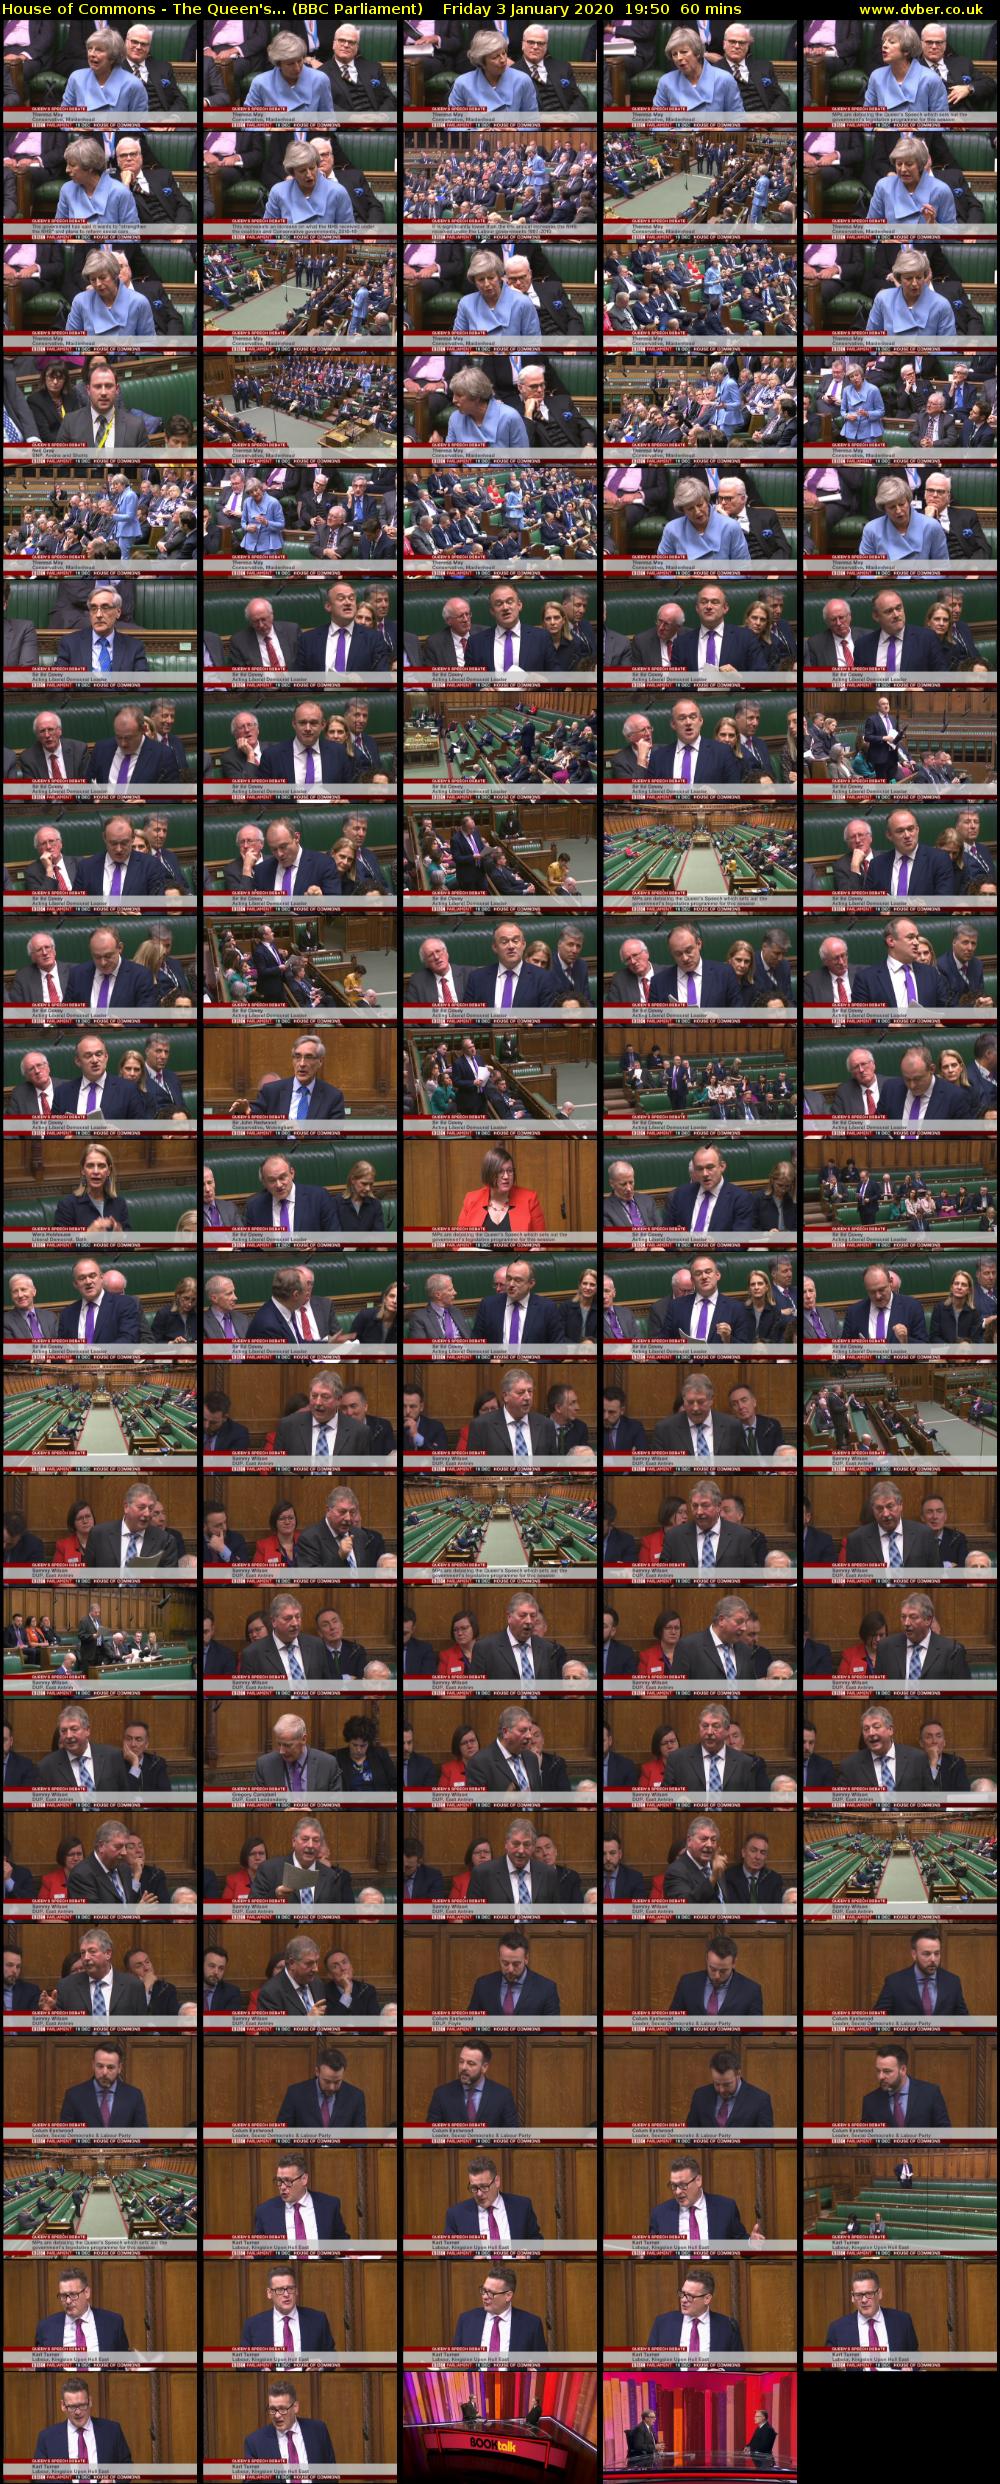 House of Commons - The Queen's... (BBC Parliament) Friday 3 January 2020 19:50 - 20:50